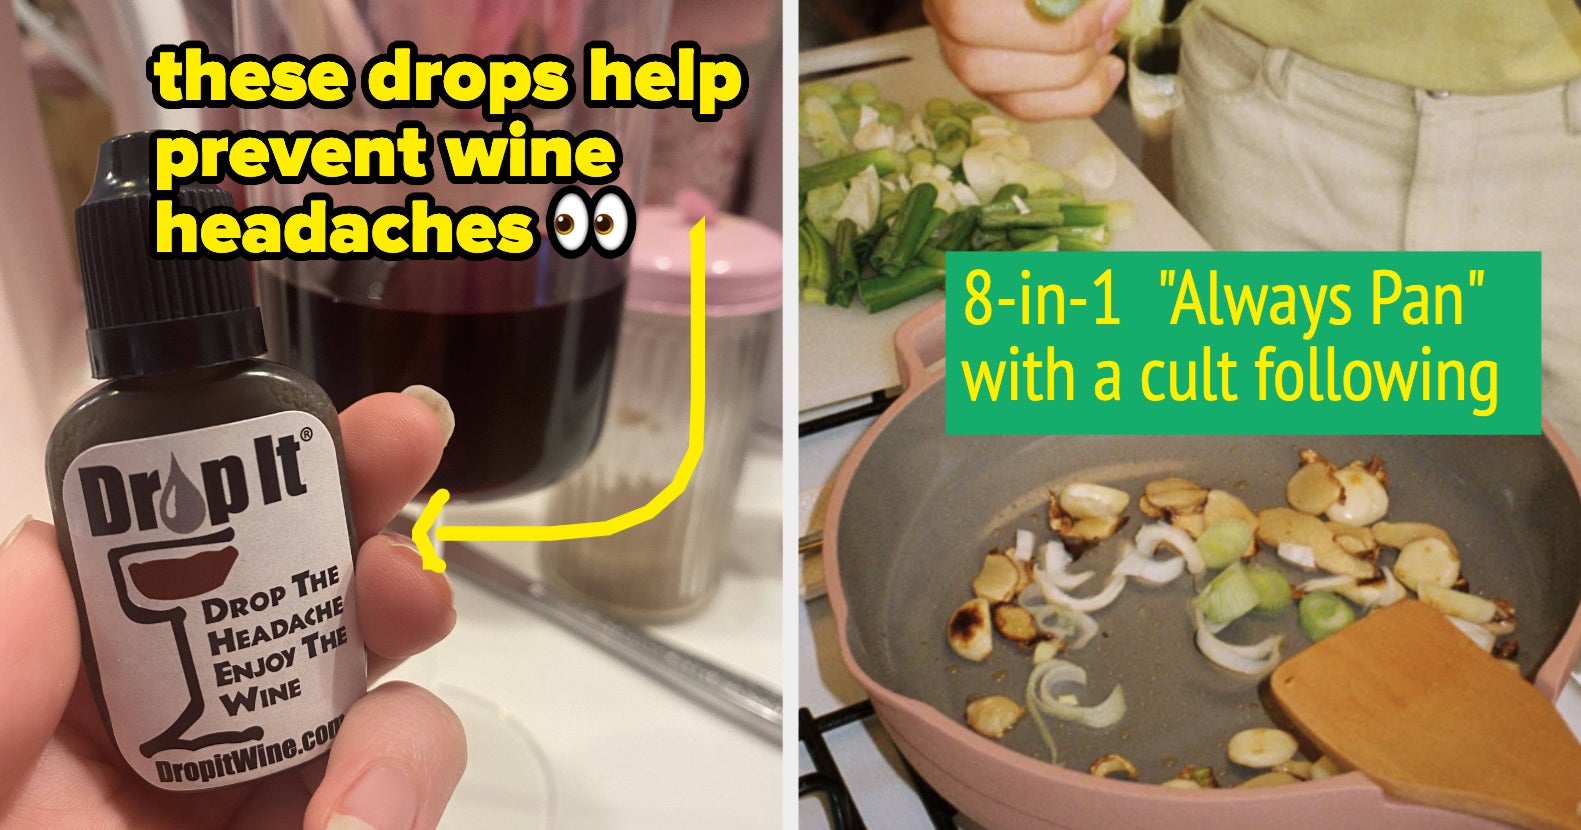 34 Random Products That'll Make Your Life Easier